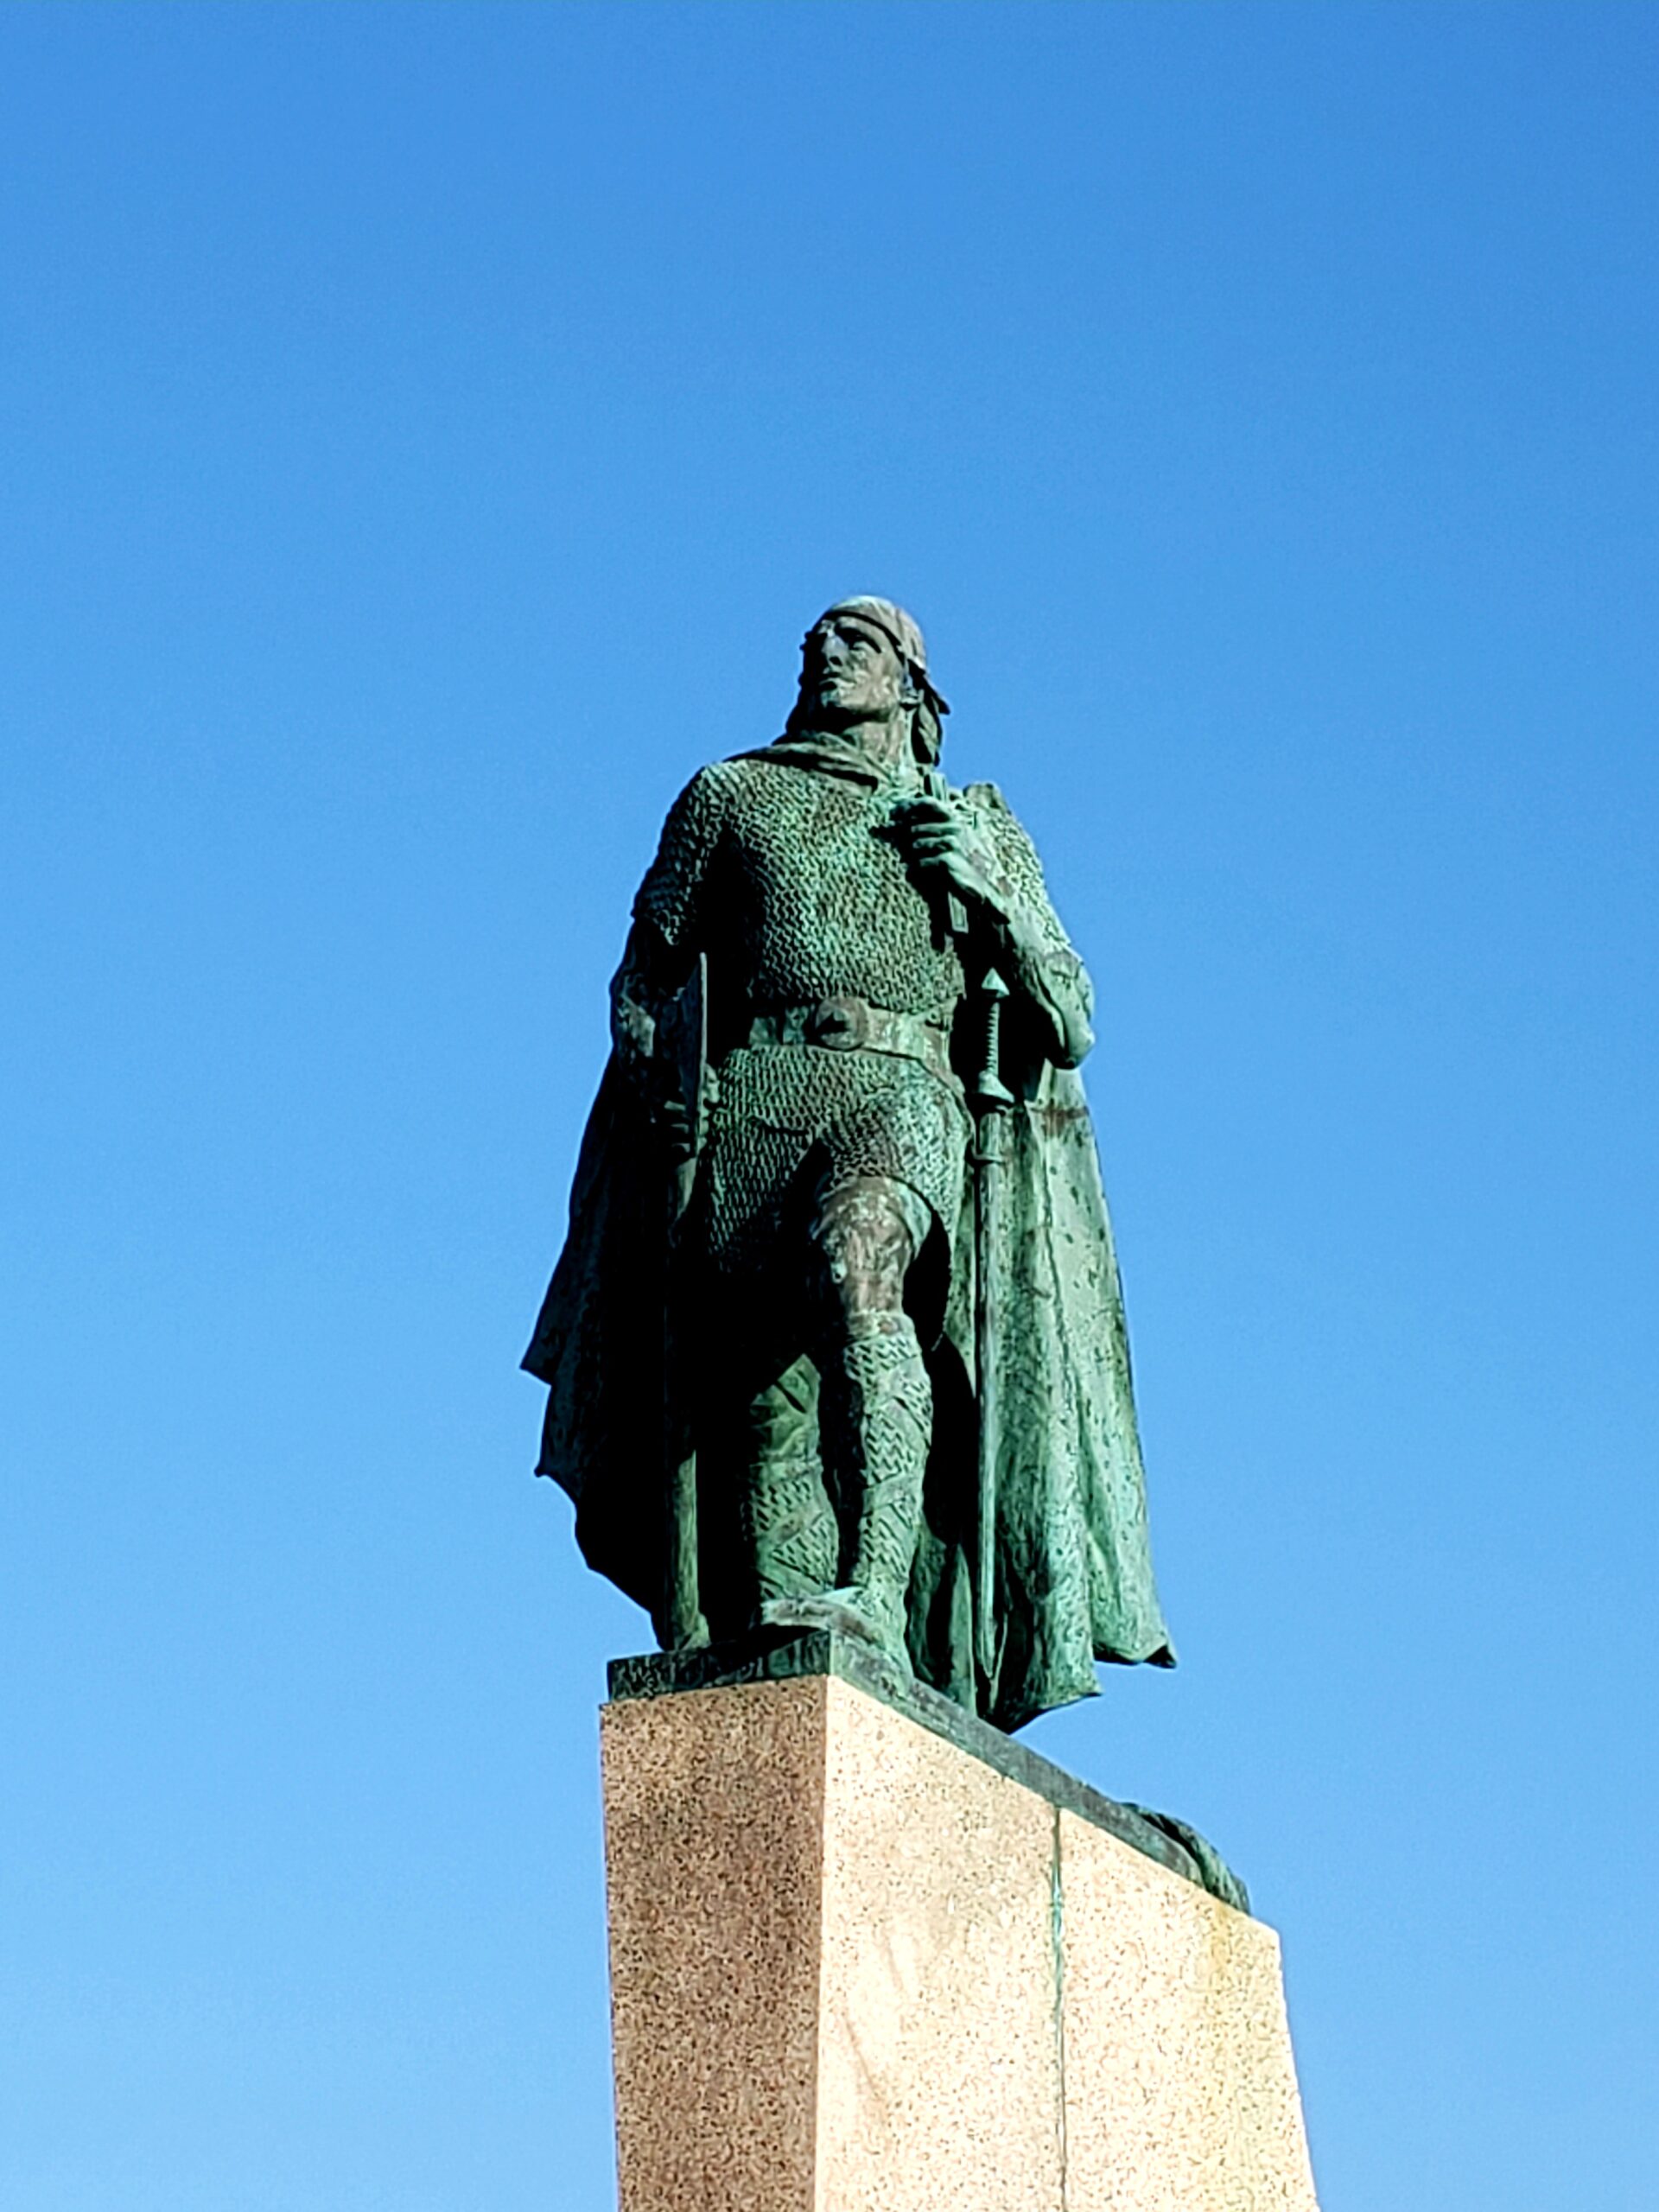 Leif Eriksson statue in front of the Hallgrímskirkja (Photo Credit: Chris Campbell)